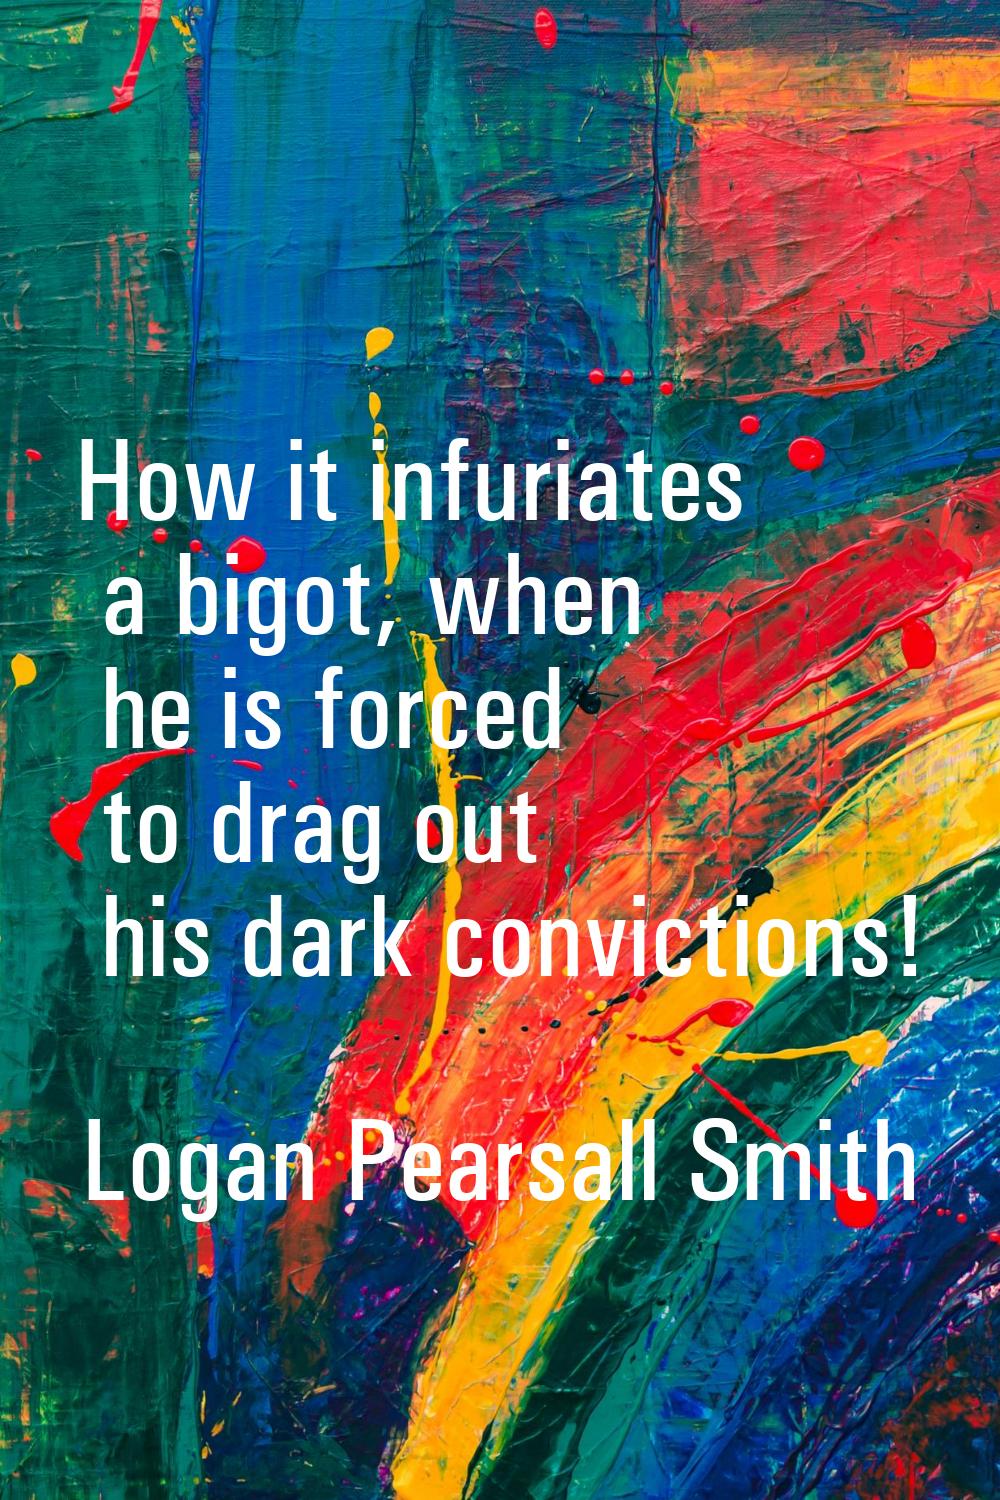 How it infuriates a bigot, when he is forced to drag out his dark convictions!